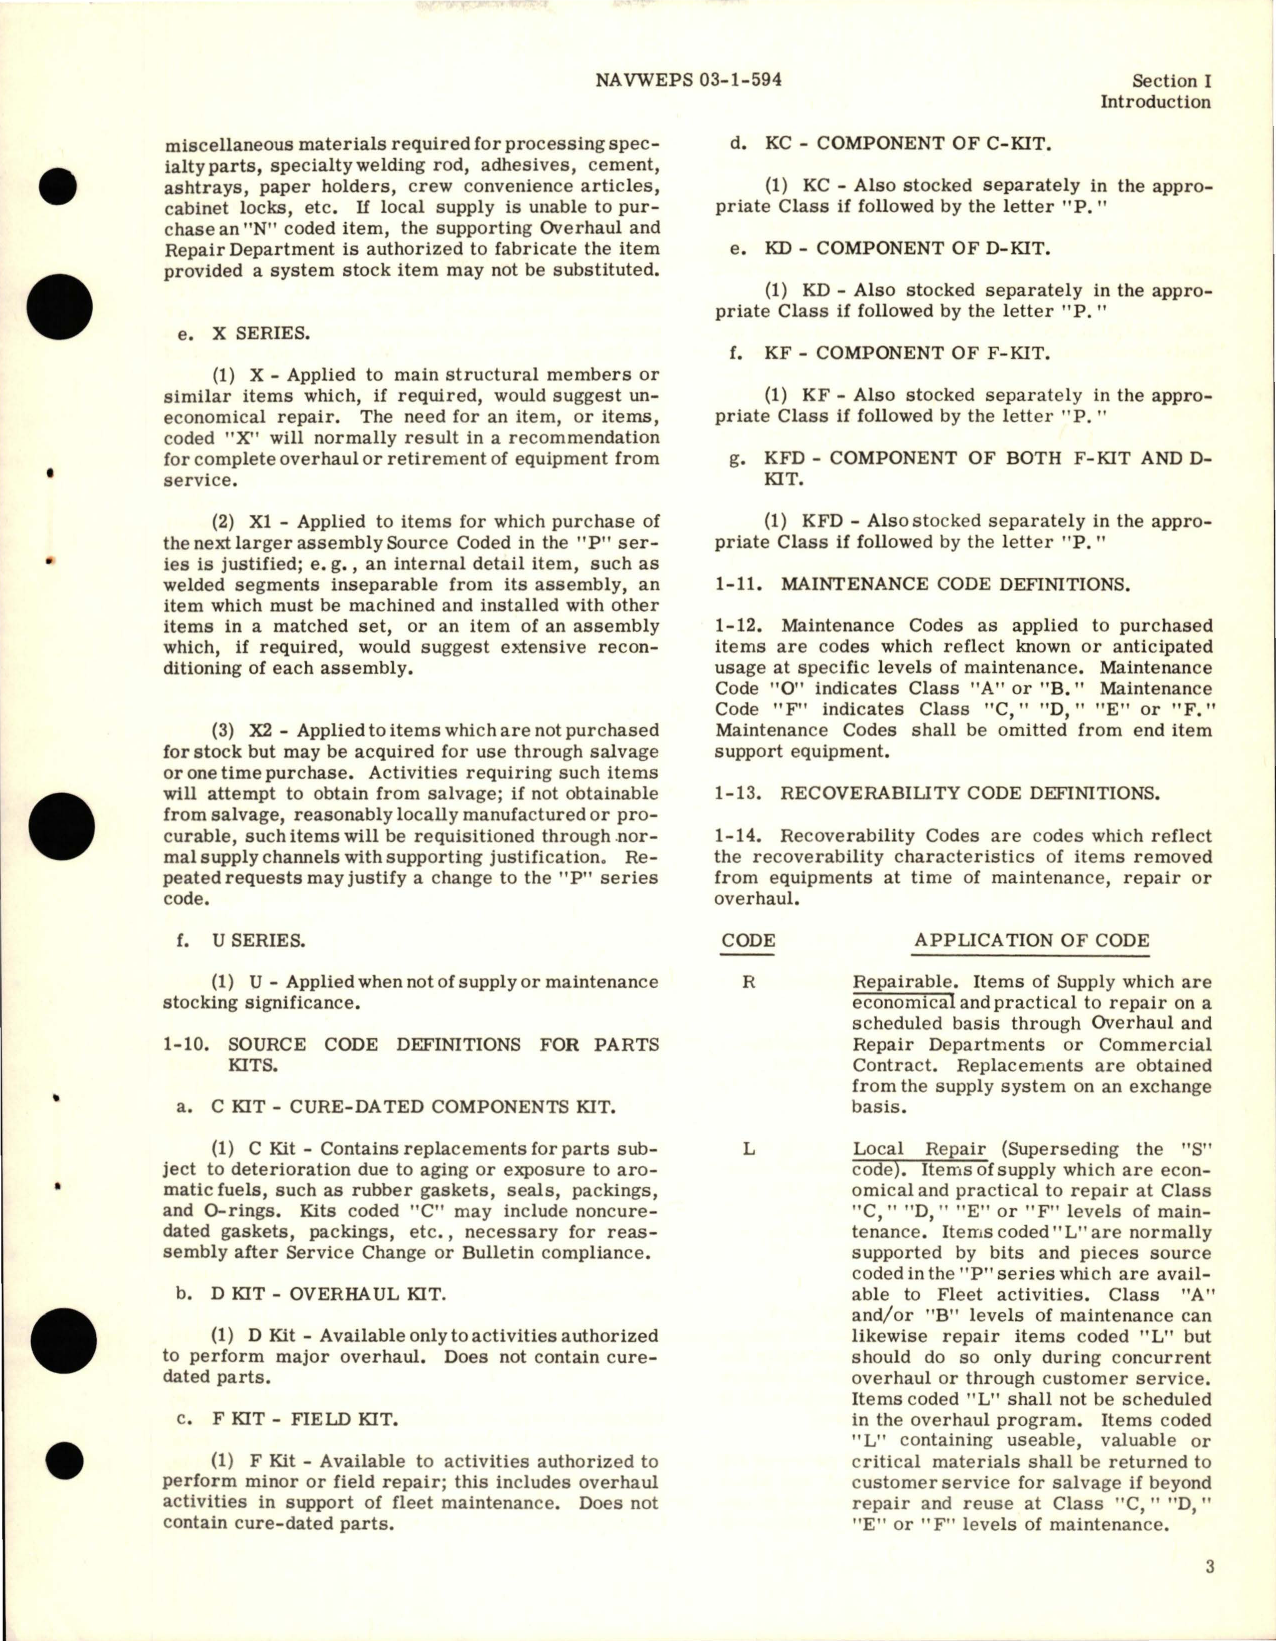 Sample page 5 from AirCorps Library document: Illustrated Parts Breakdown for Multi-Directional Electromagnetic Inertia Reel Assembly - Model 10 and Model 20